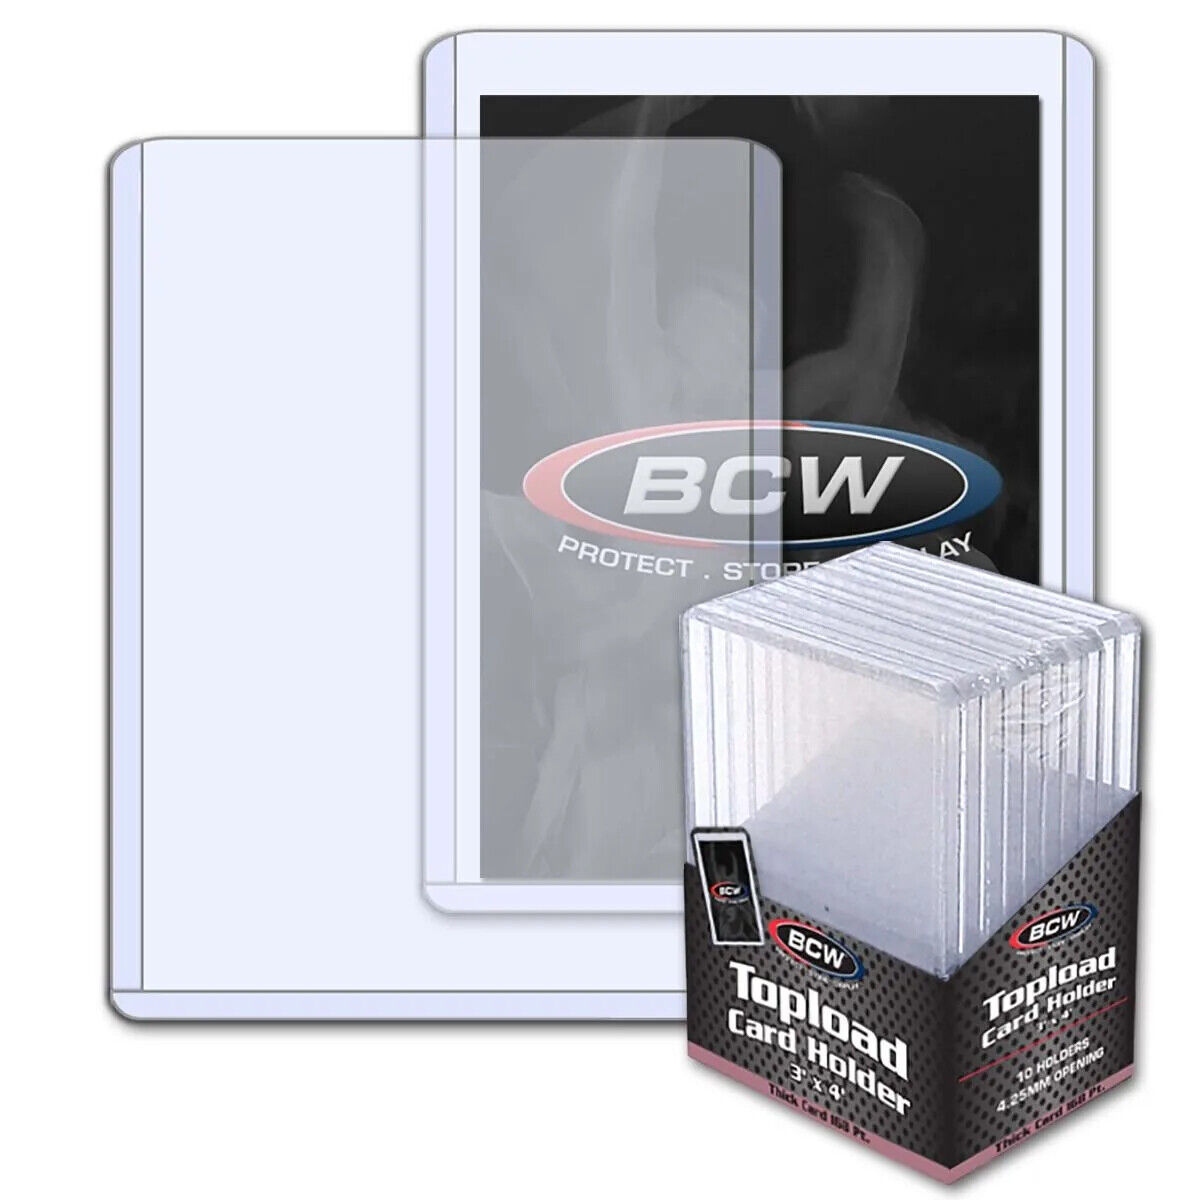 Bcw Thick Card Topload Holder 168 Pt 10ct.